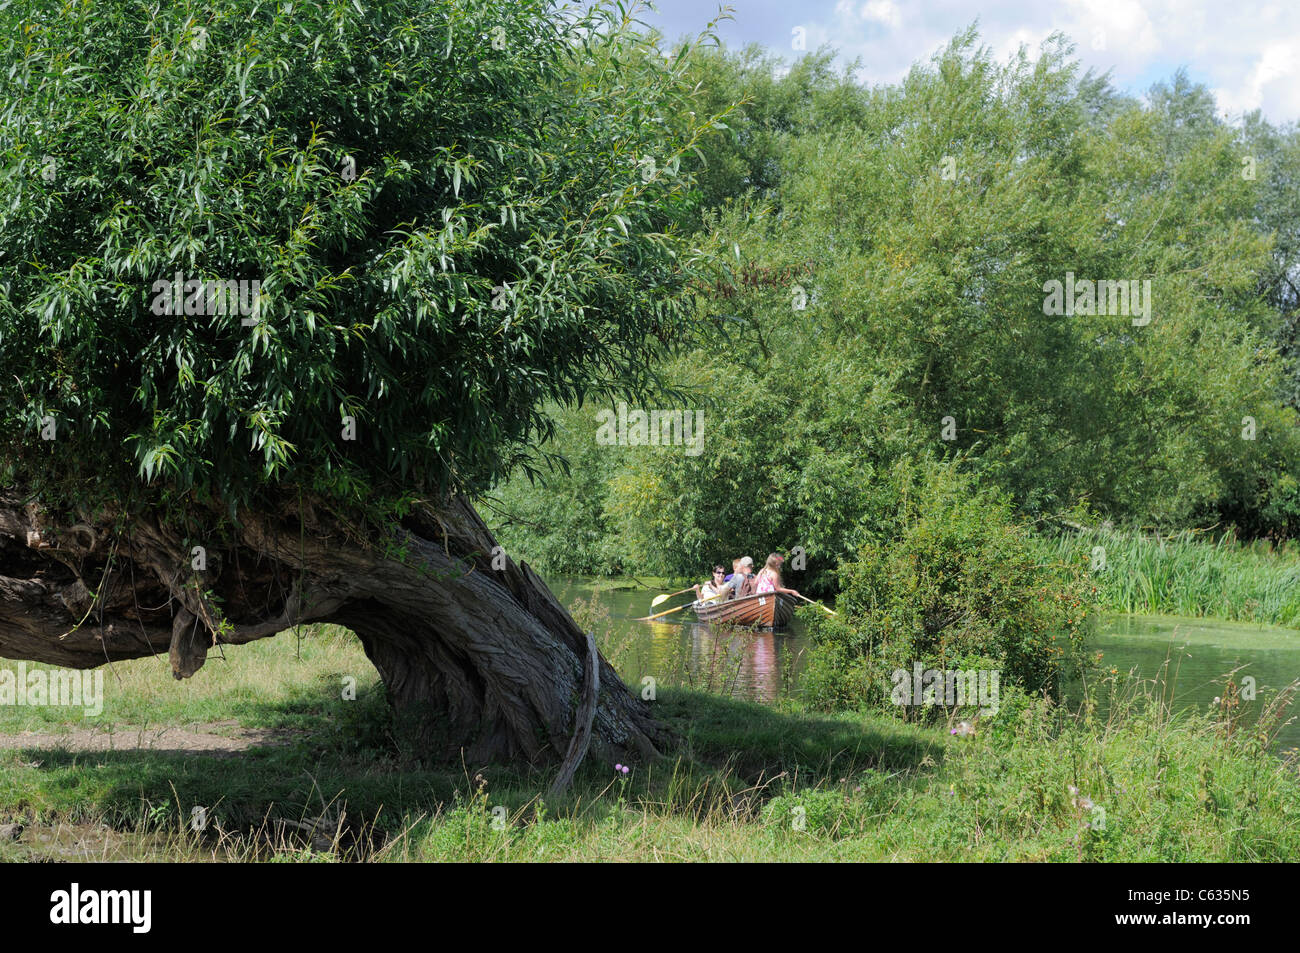 A family enjoying a day out on a rowing boat on the River Stour in the Essex countryside, England. Stock Photo